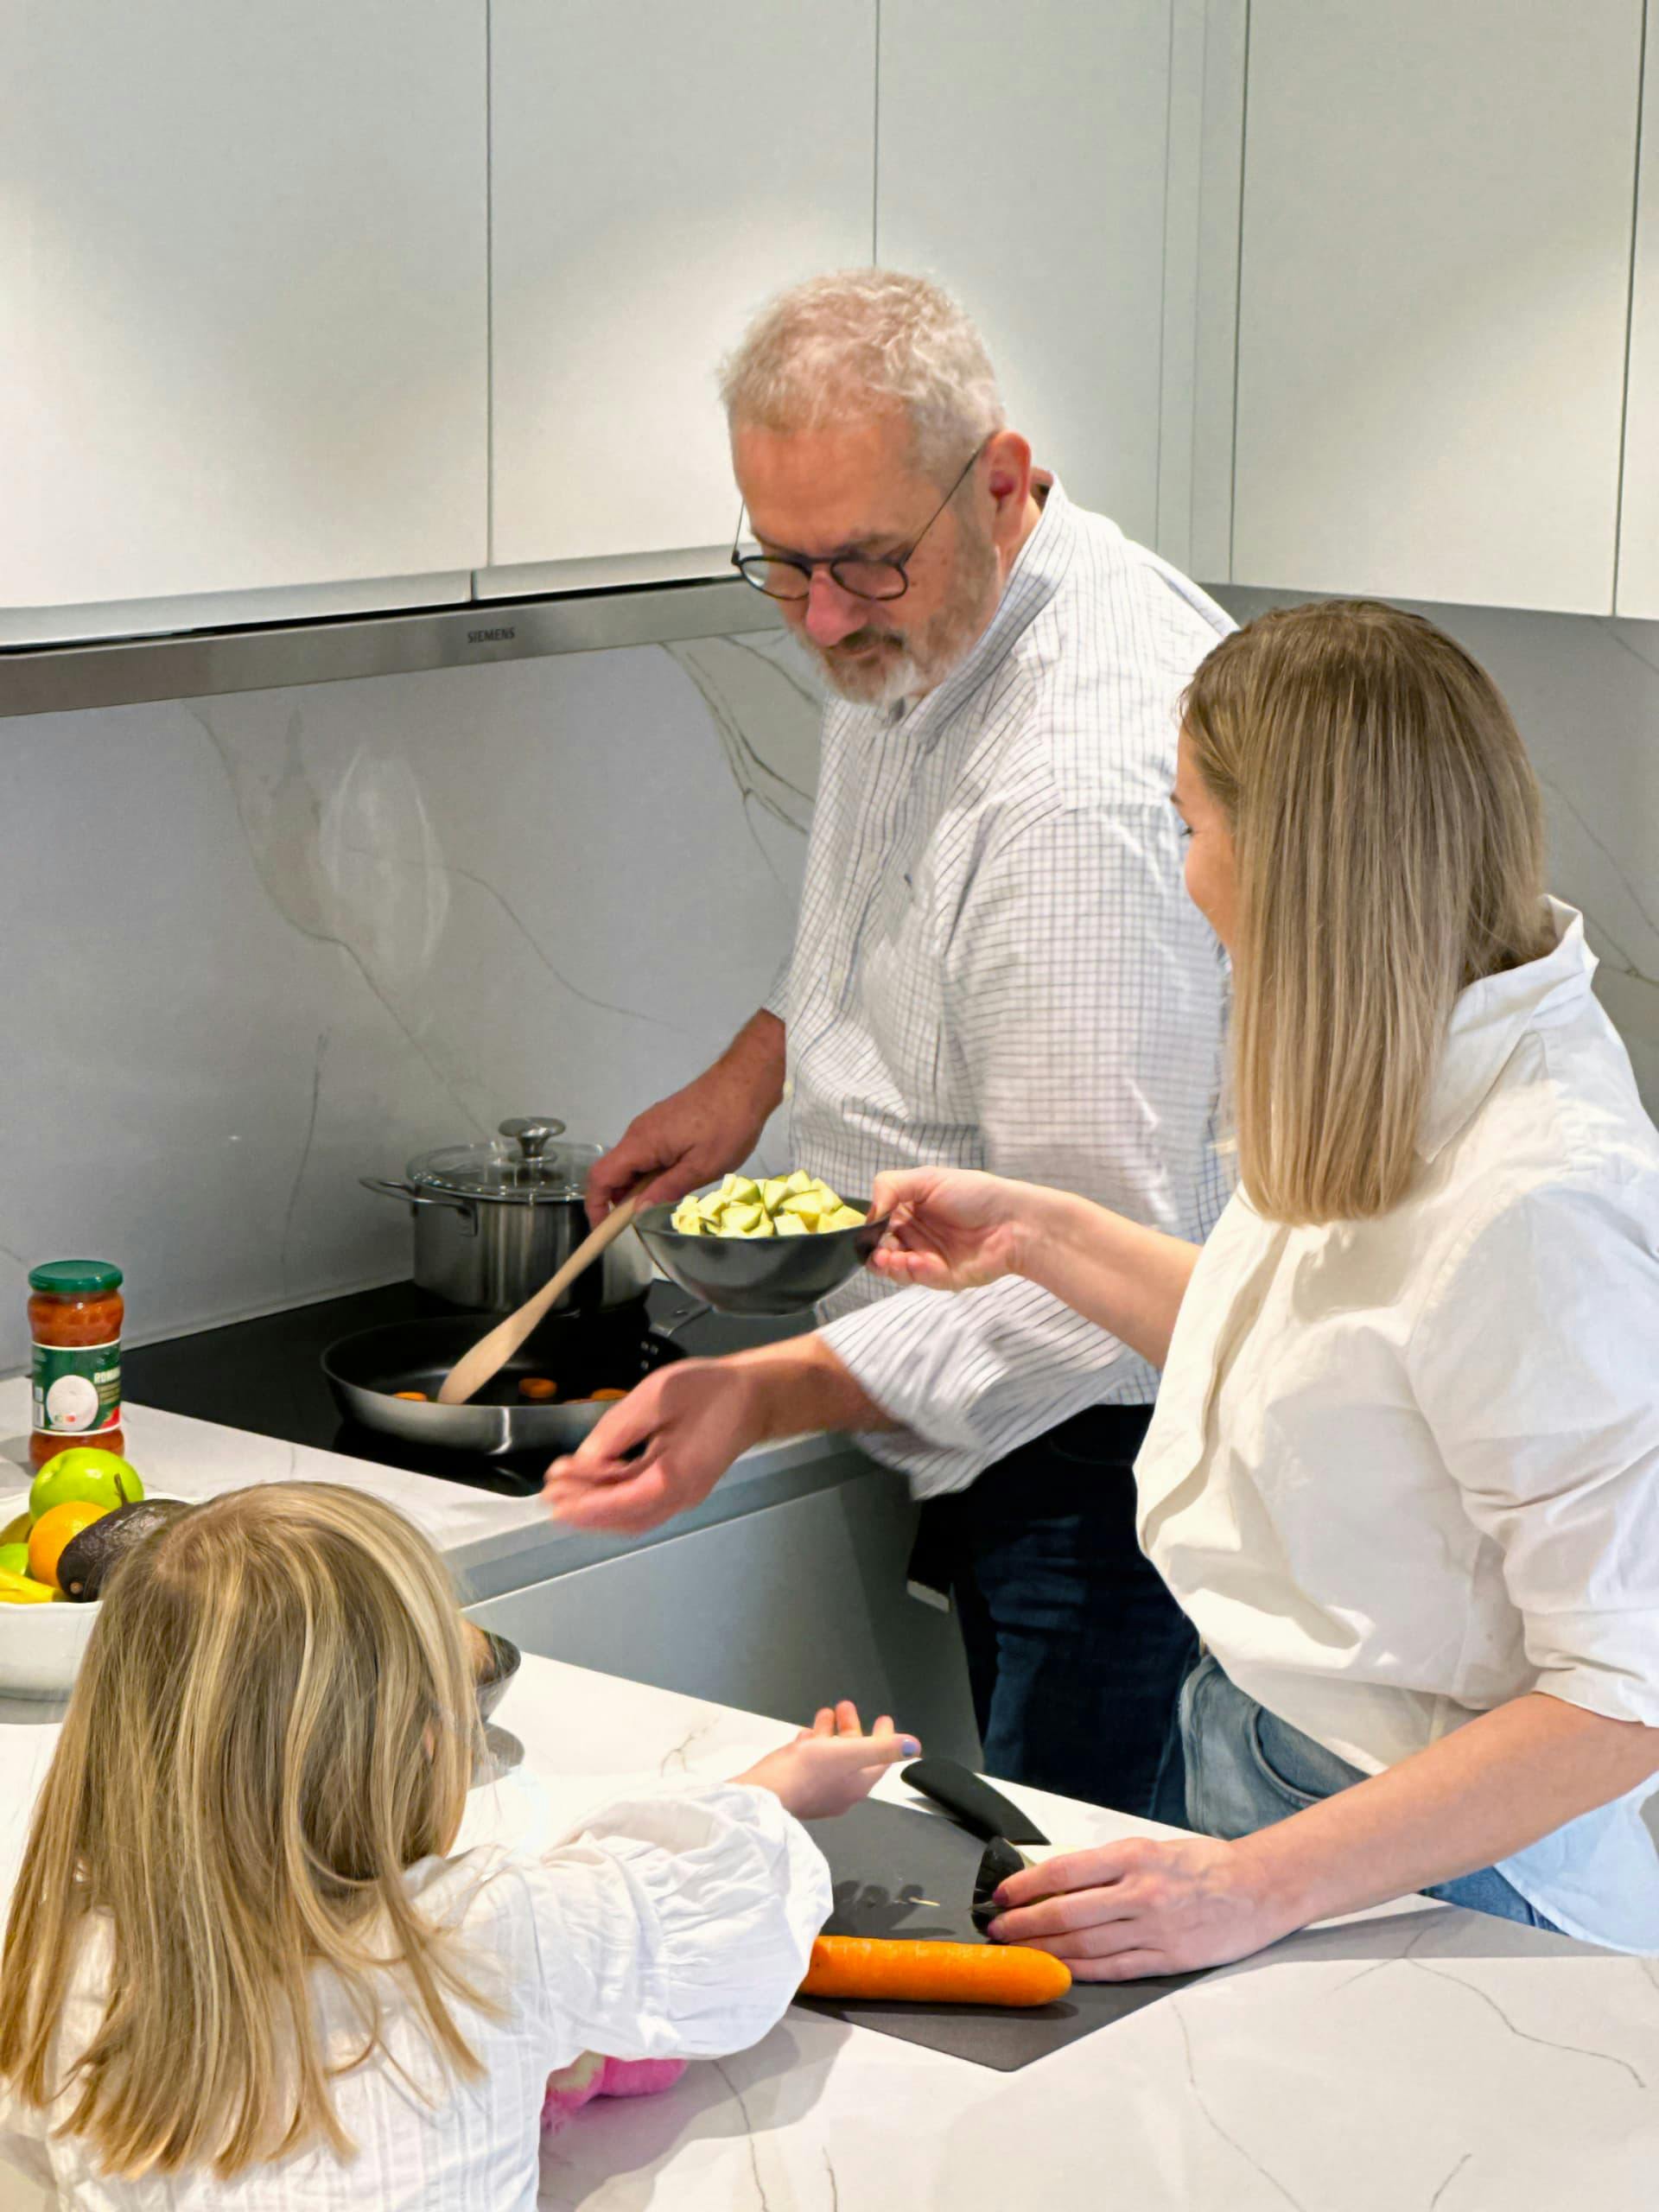 The picture depicts a family cooking in a kitchen. It shows the electric stove, a cooking pan on top of it with vegetables inside, and on the countertop ingredients for cooking.